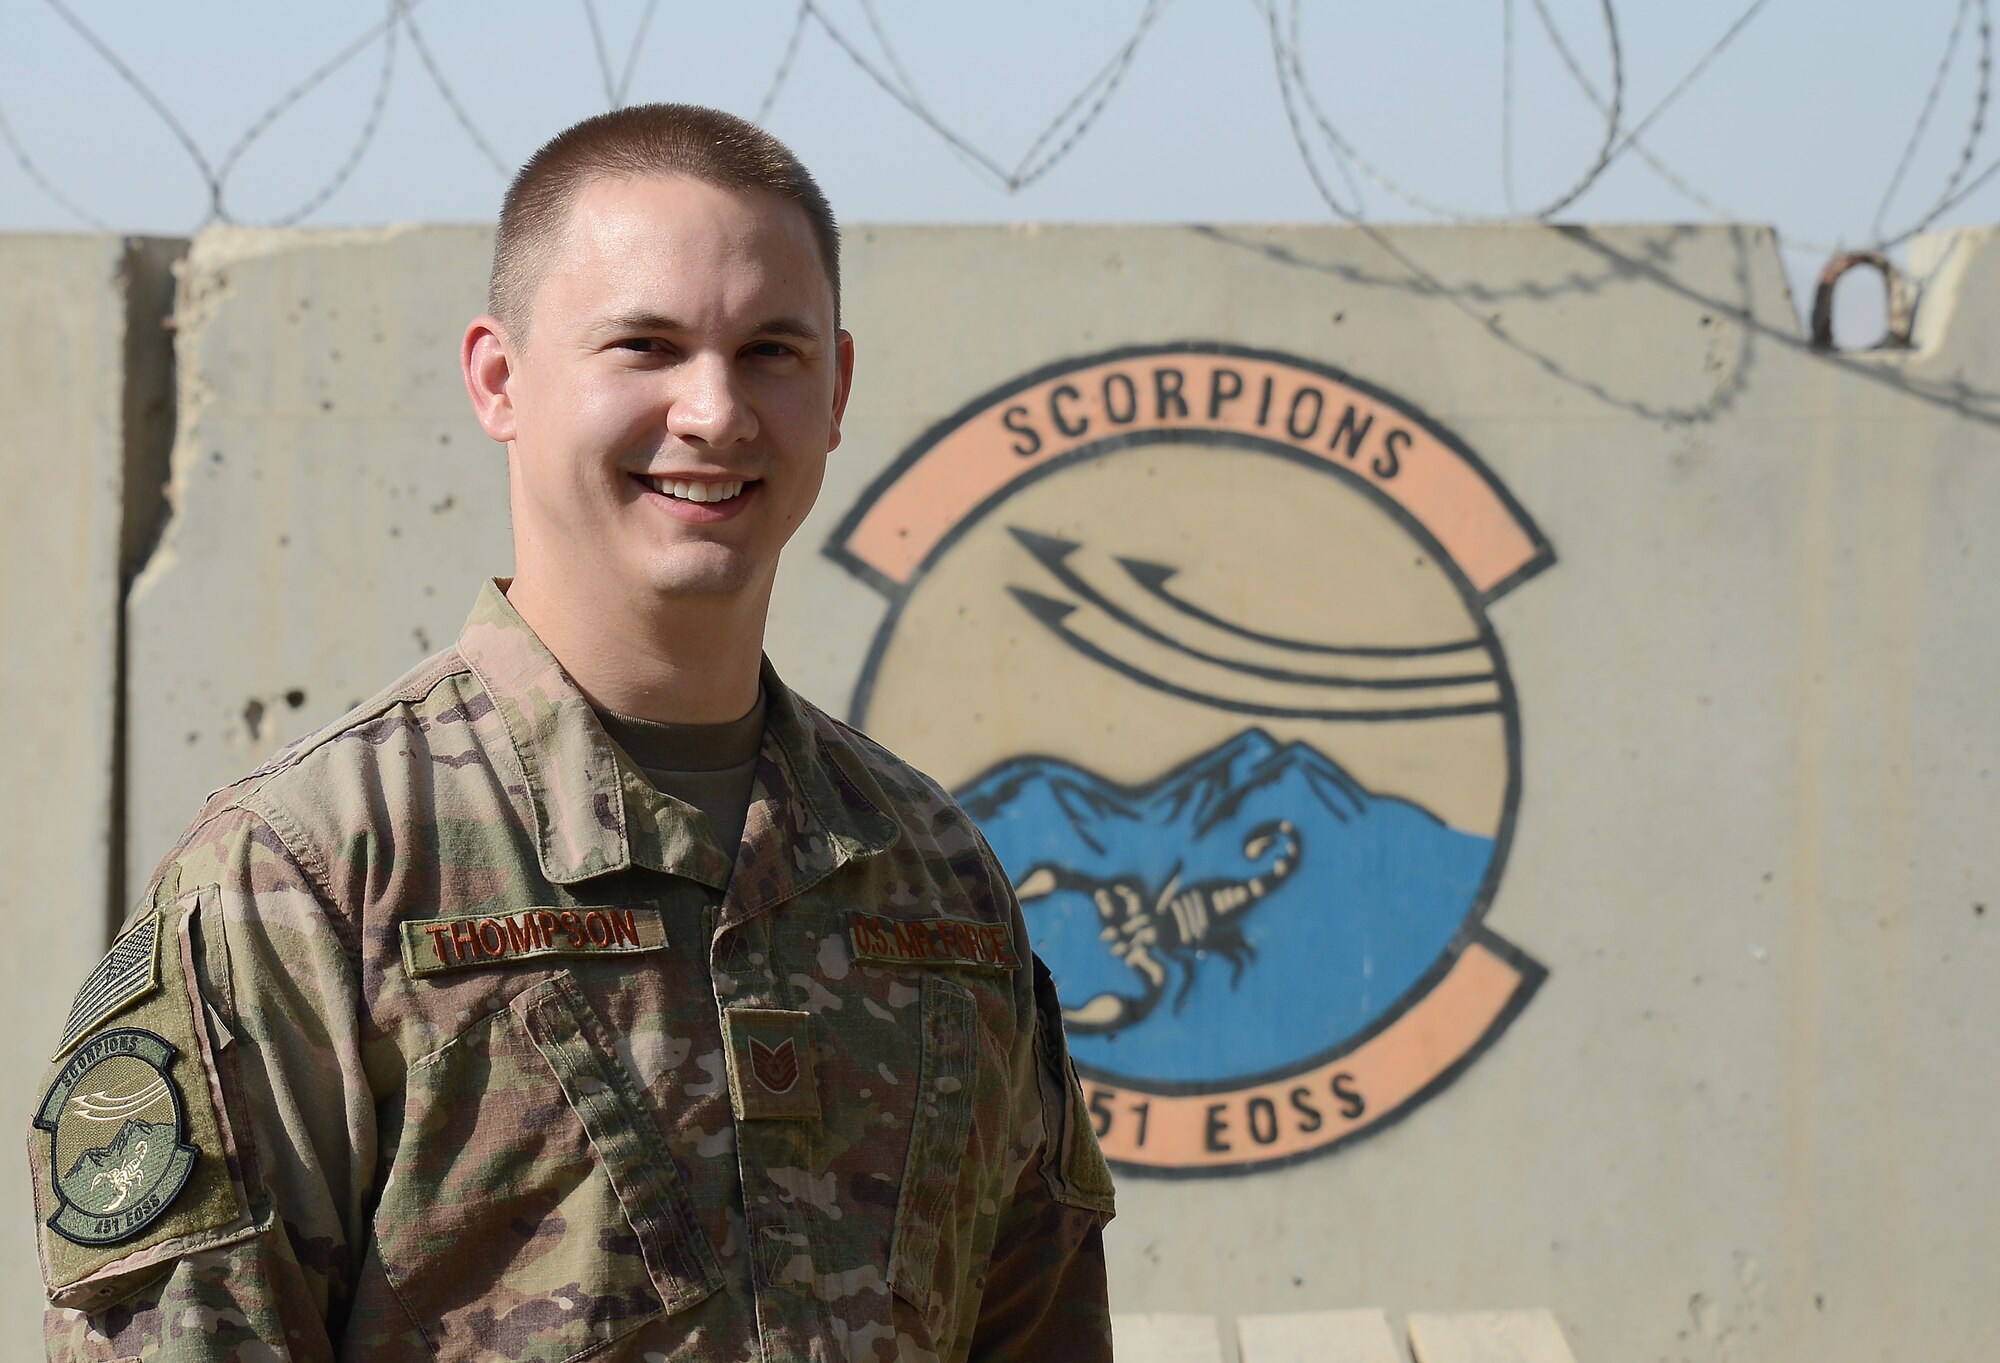 Tech. Sgt. Steven Thompson, 451st Expeditionary Operation Support Squadron command and control operations NCOIC, poses for a photo Jan. 9, 2018 at Kandahar Airfield, Afghanistan.